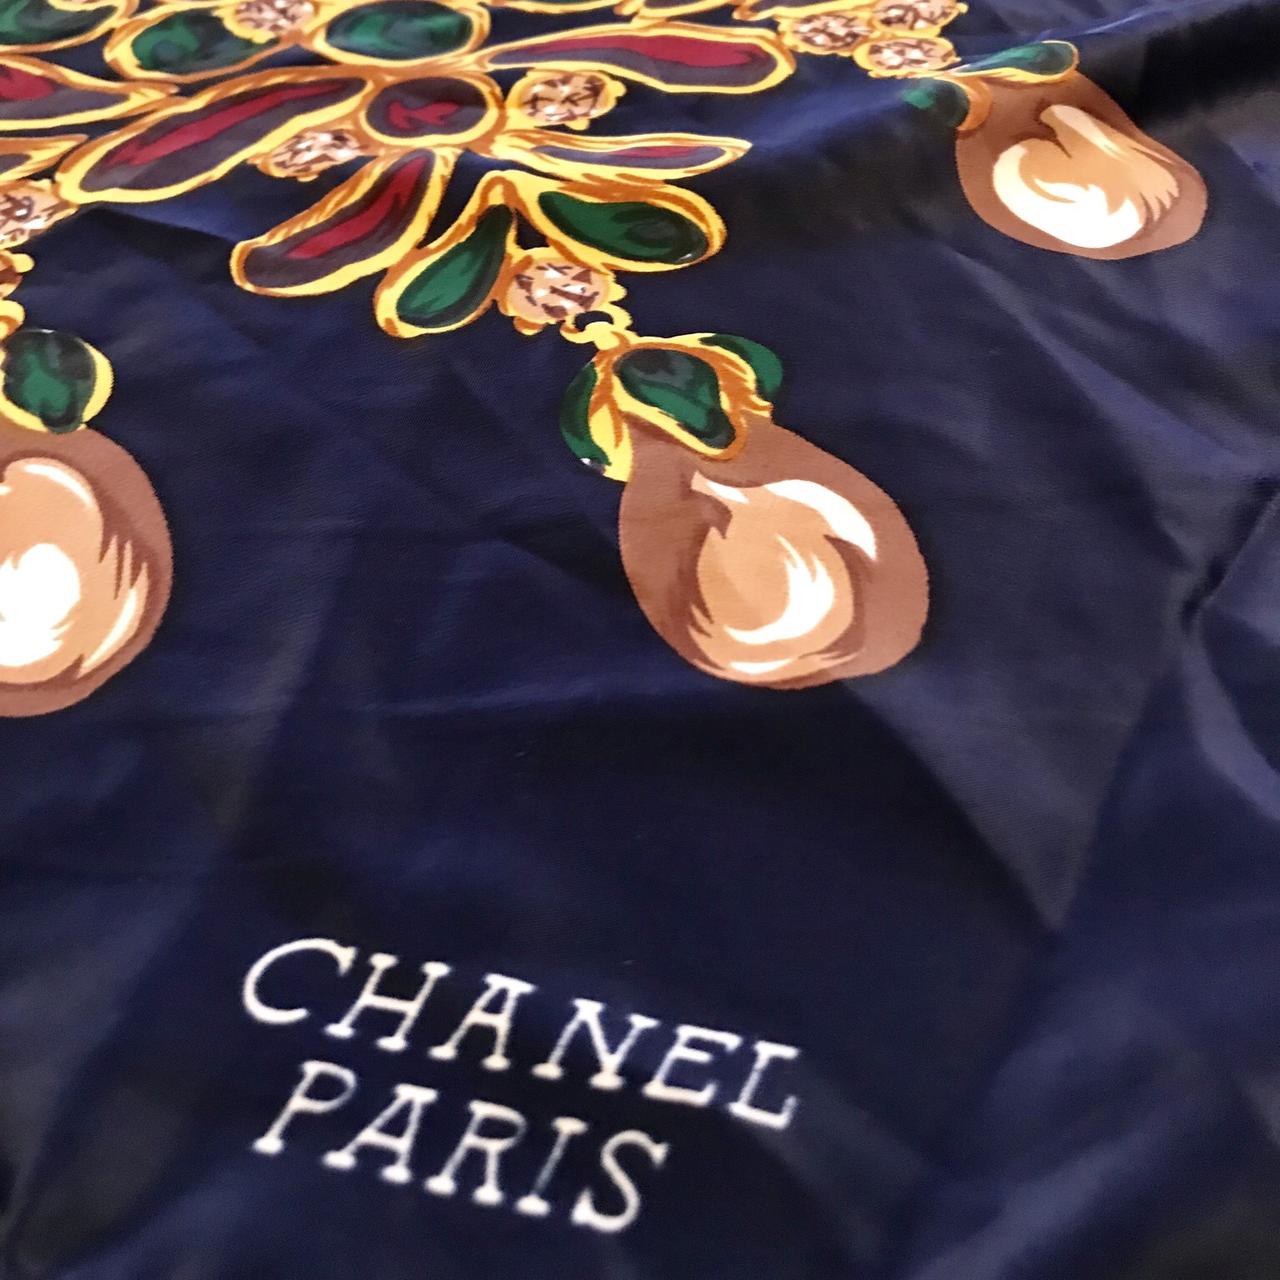 Vintage Authentic Chanel 100% silk scarf. Beautiful